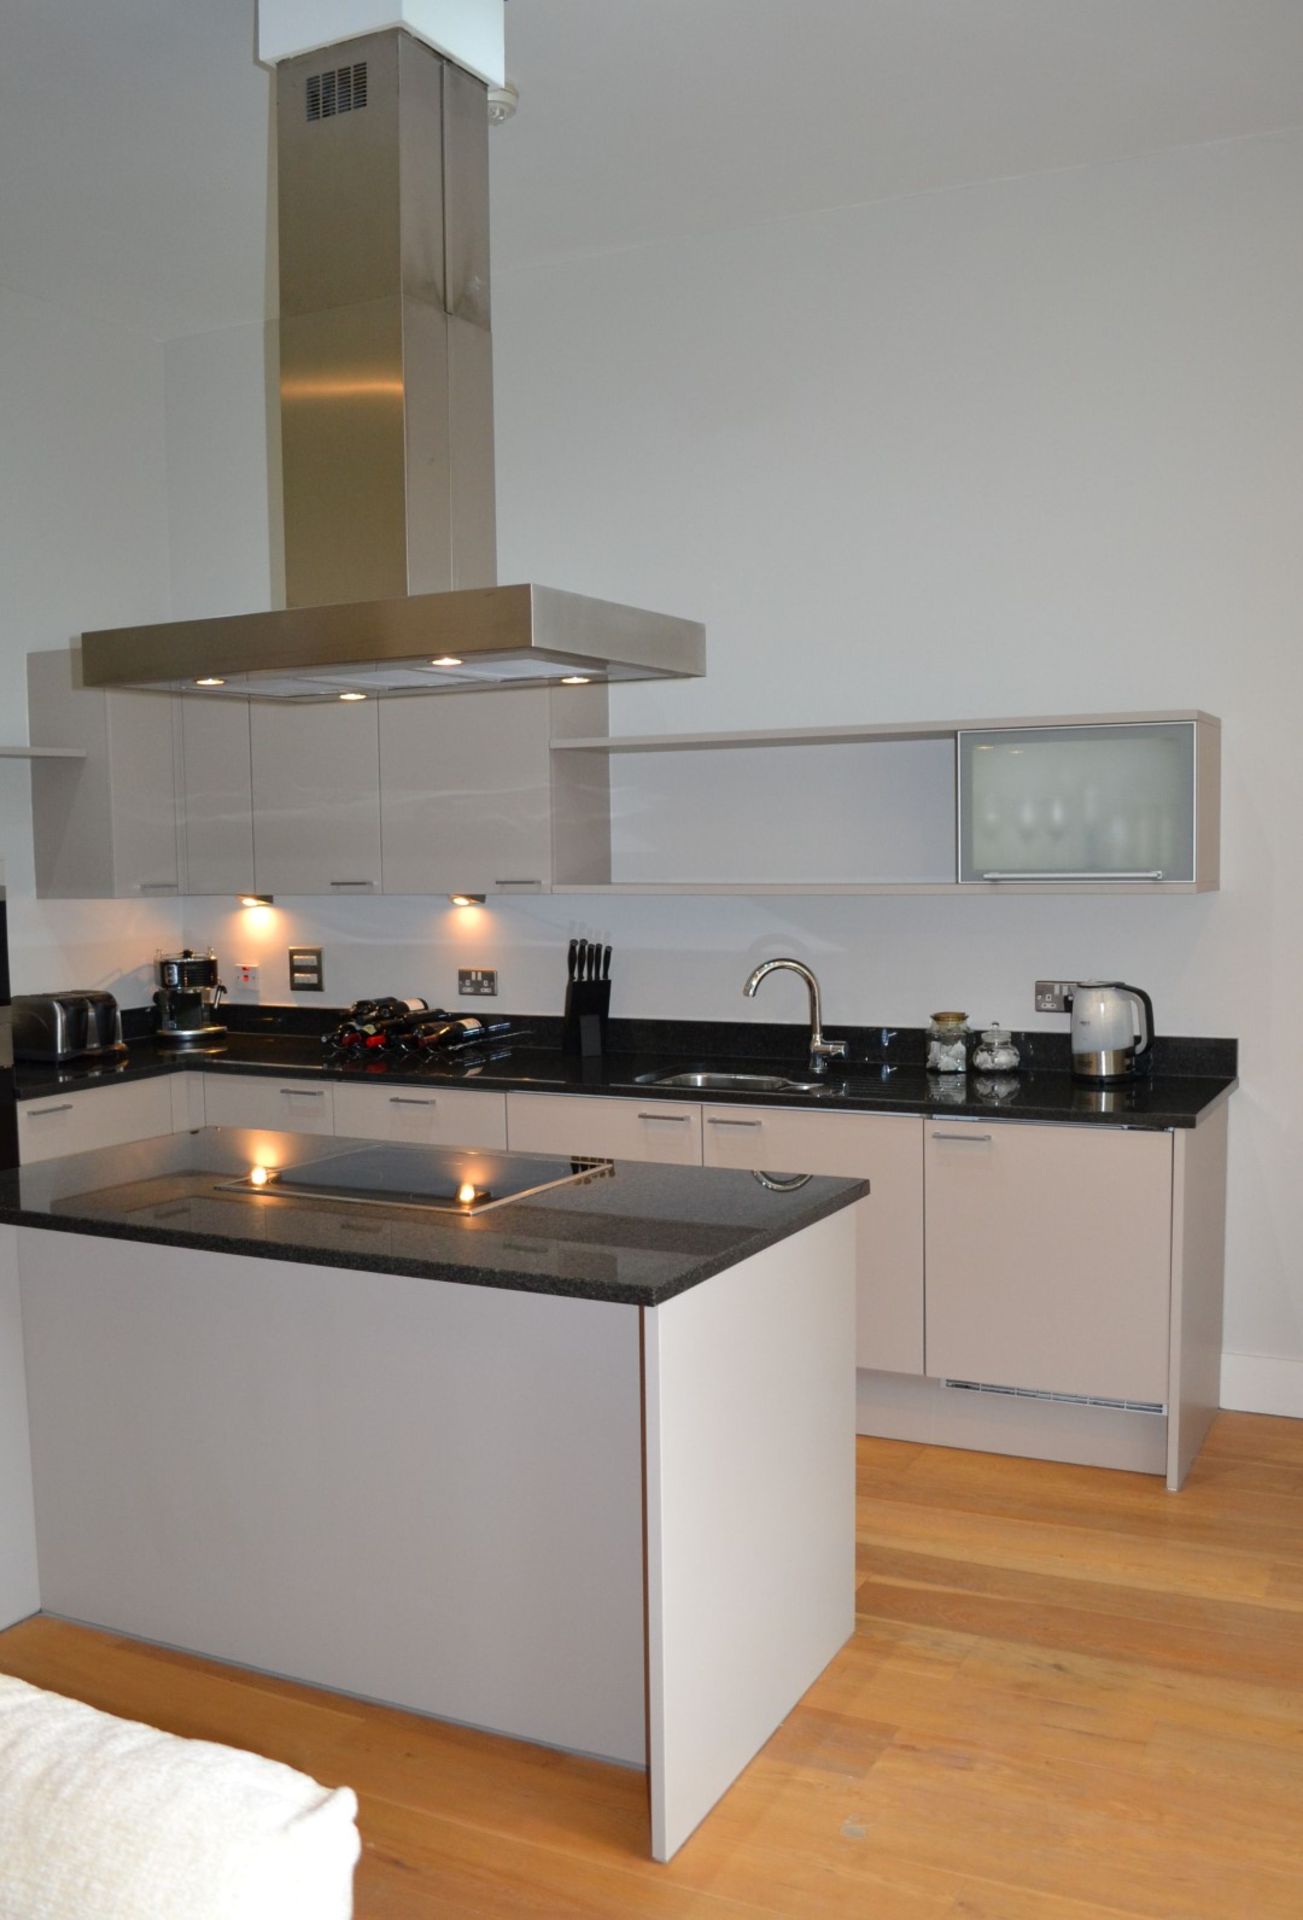 1 x Stunning Poggenpohl Kitchen With Black Granite Worktops and Miele and Siemens Appliances - In - Image 3 of 67